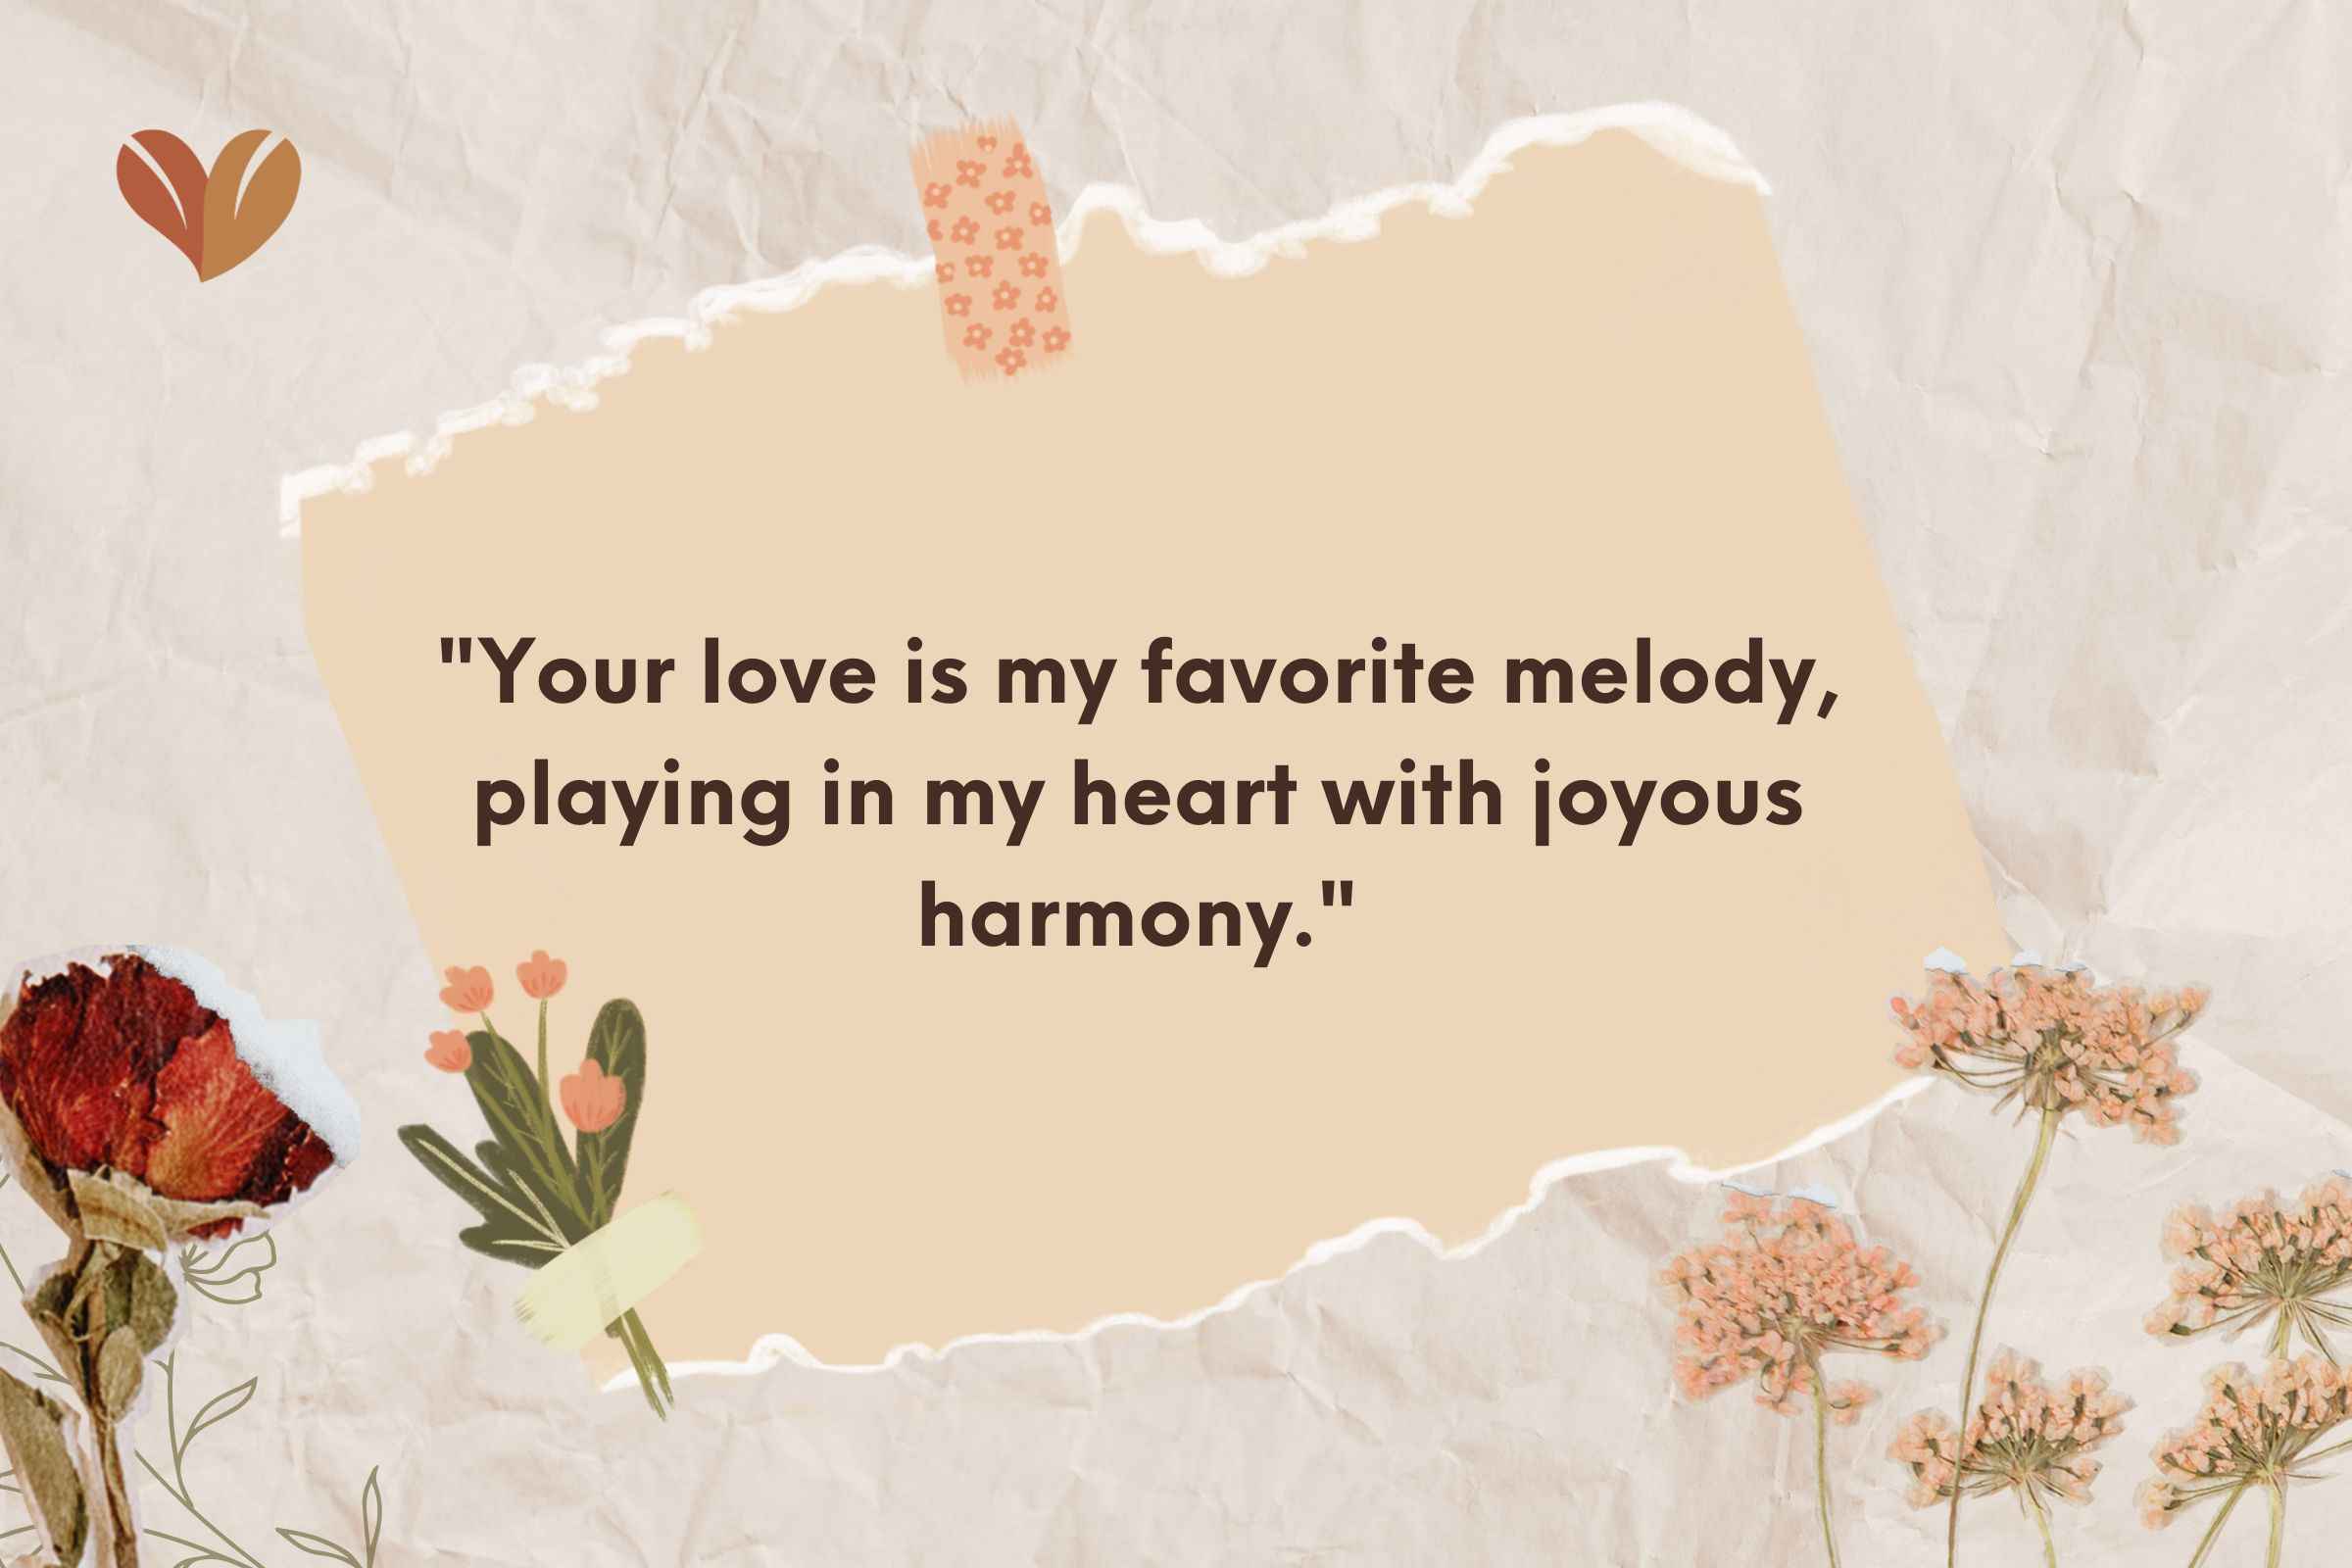 Your love is my favorite melody, playing in my heart with joyous harmony.